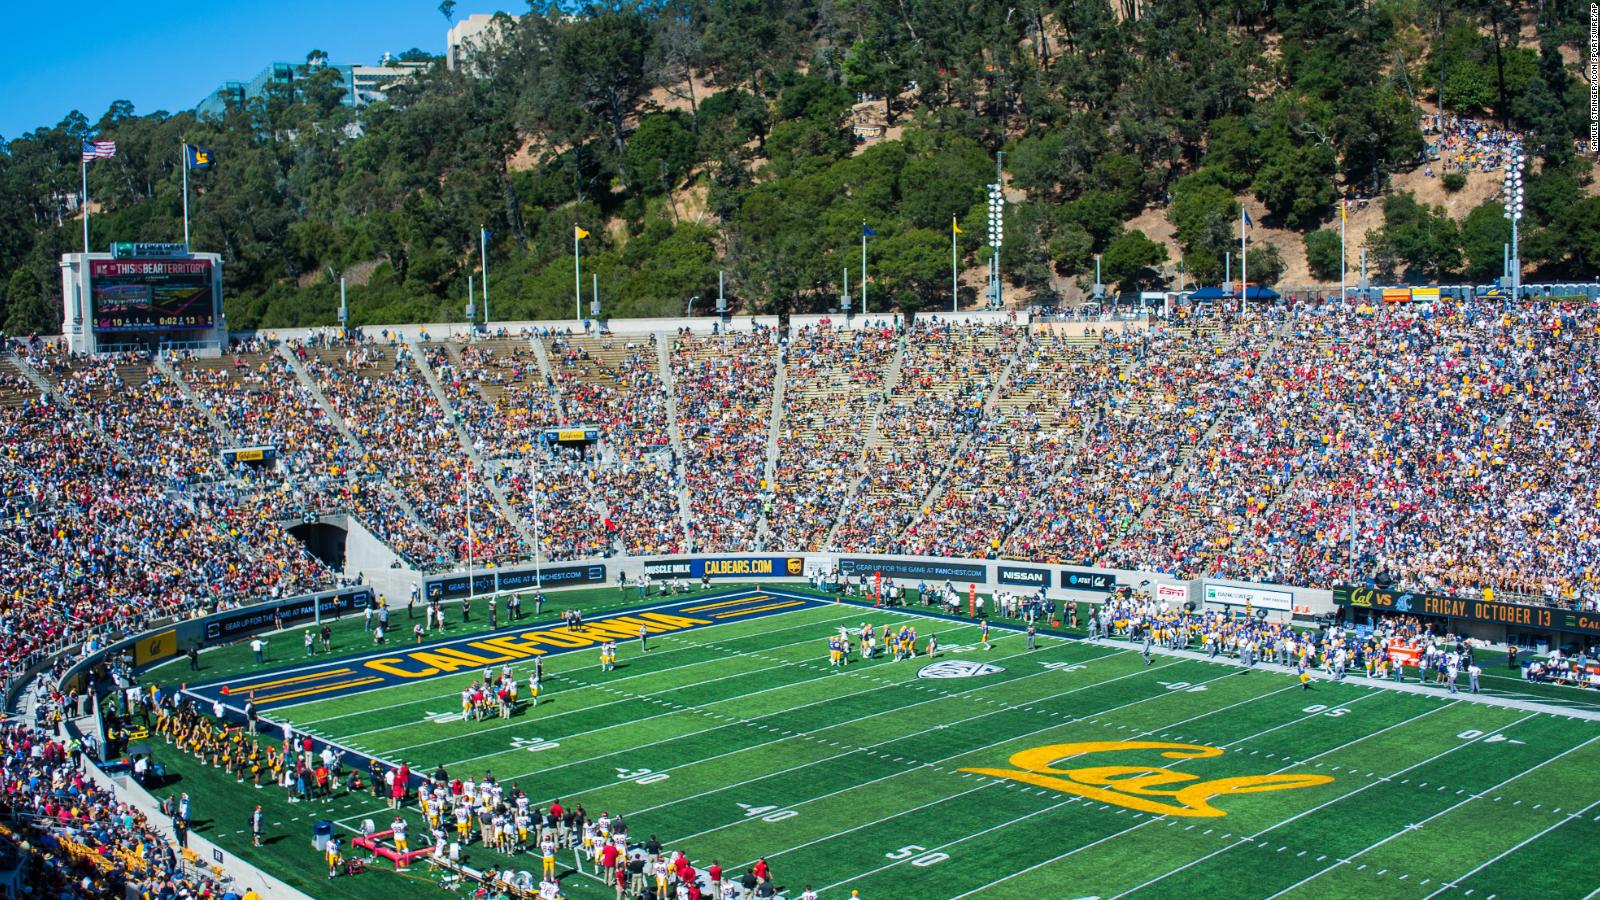 America's incredibly expensive college football stadiums - CNN